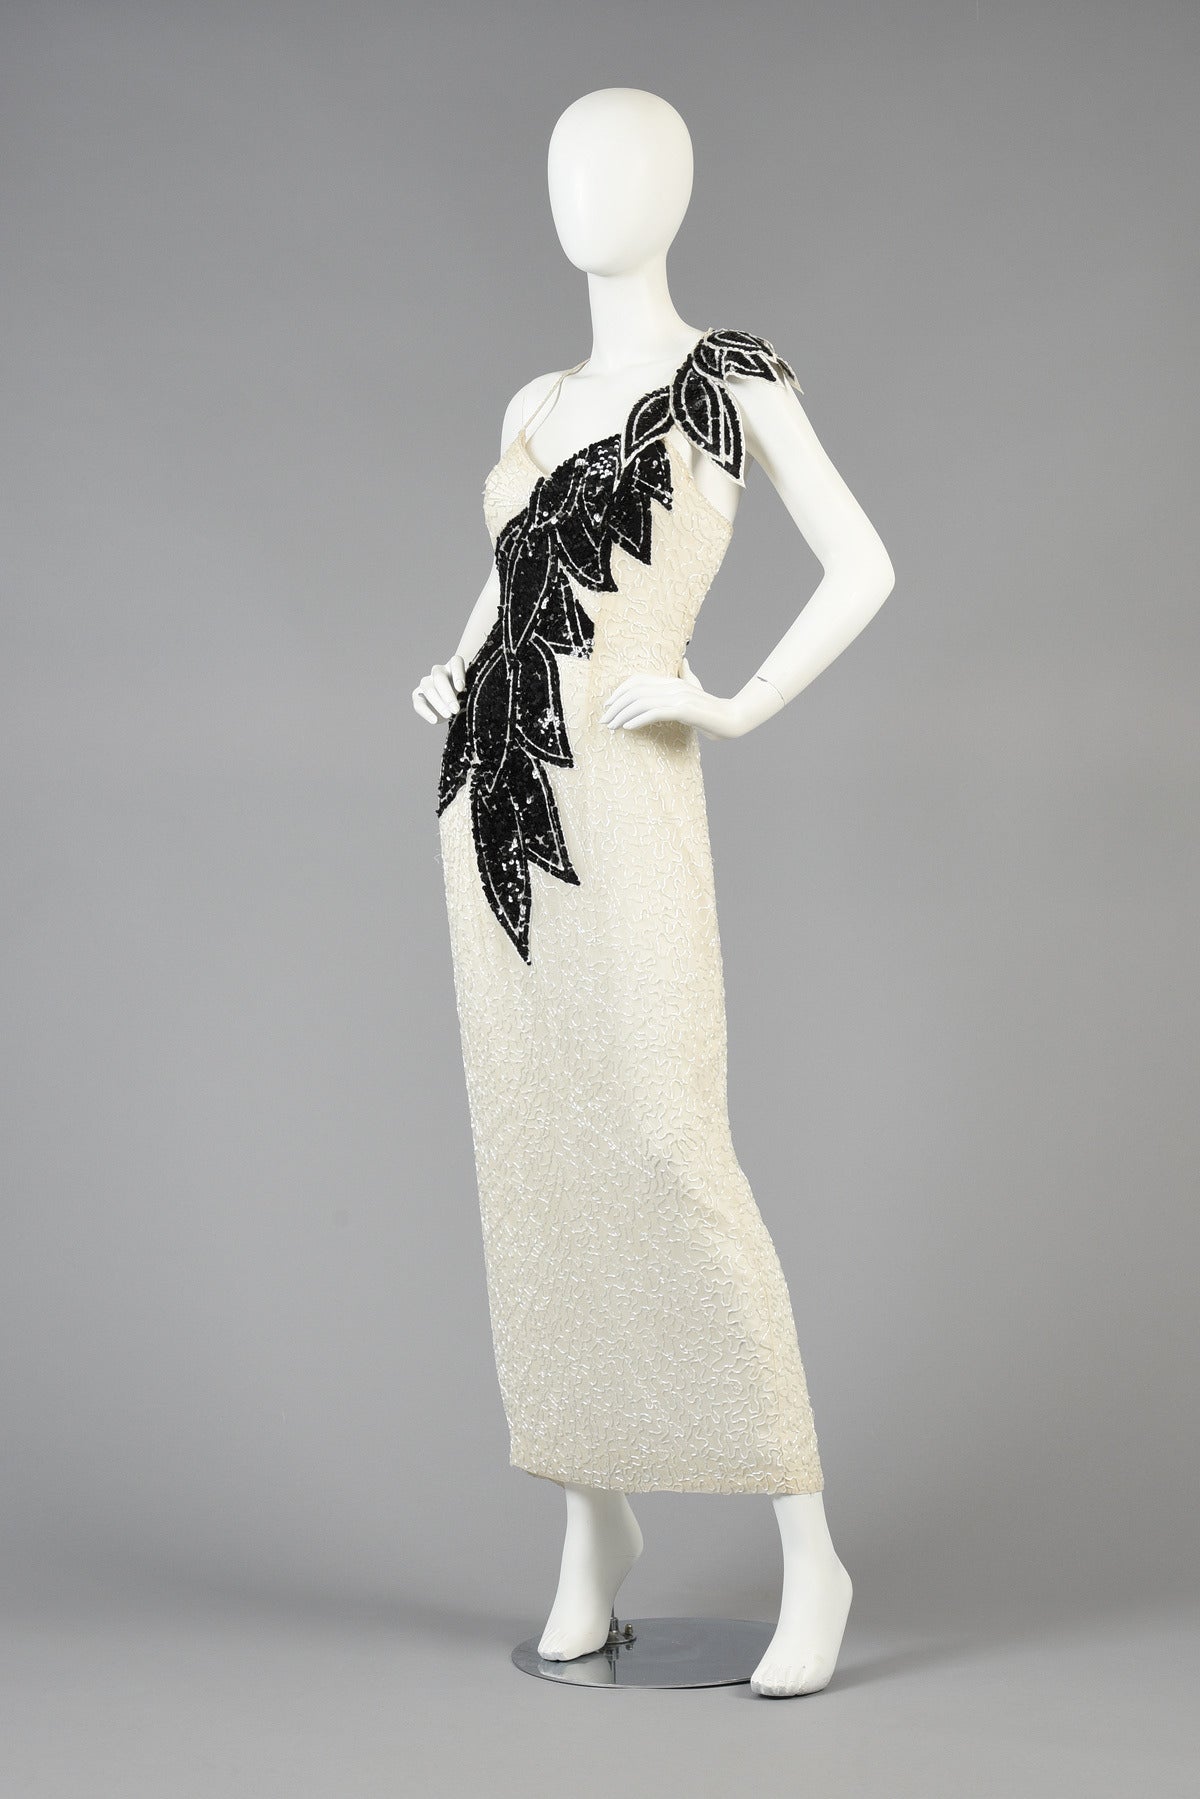 Women's Lillie Rubin Black and White Beaded Gown with Architectural Leaves For Sale